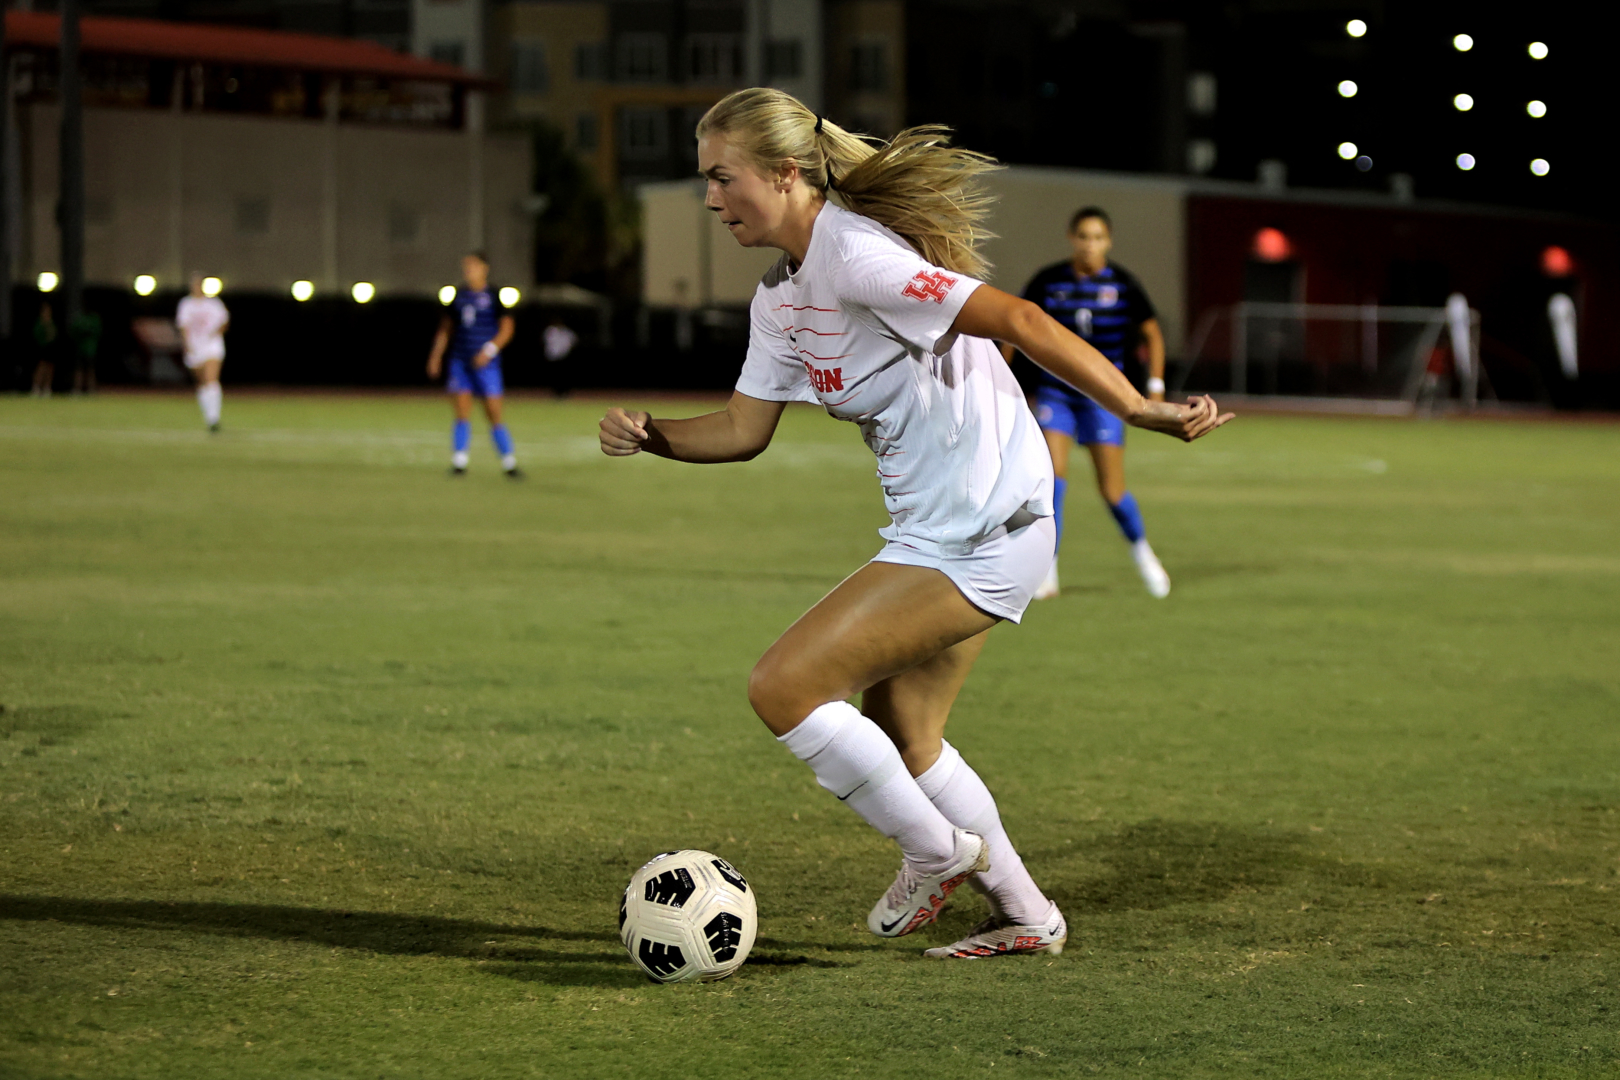 The UH soccer team closes the book on the American Athletic Conference with a 3-0 victory over Temple on Senior Night. | Courtesy of UH athletics